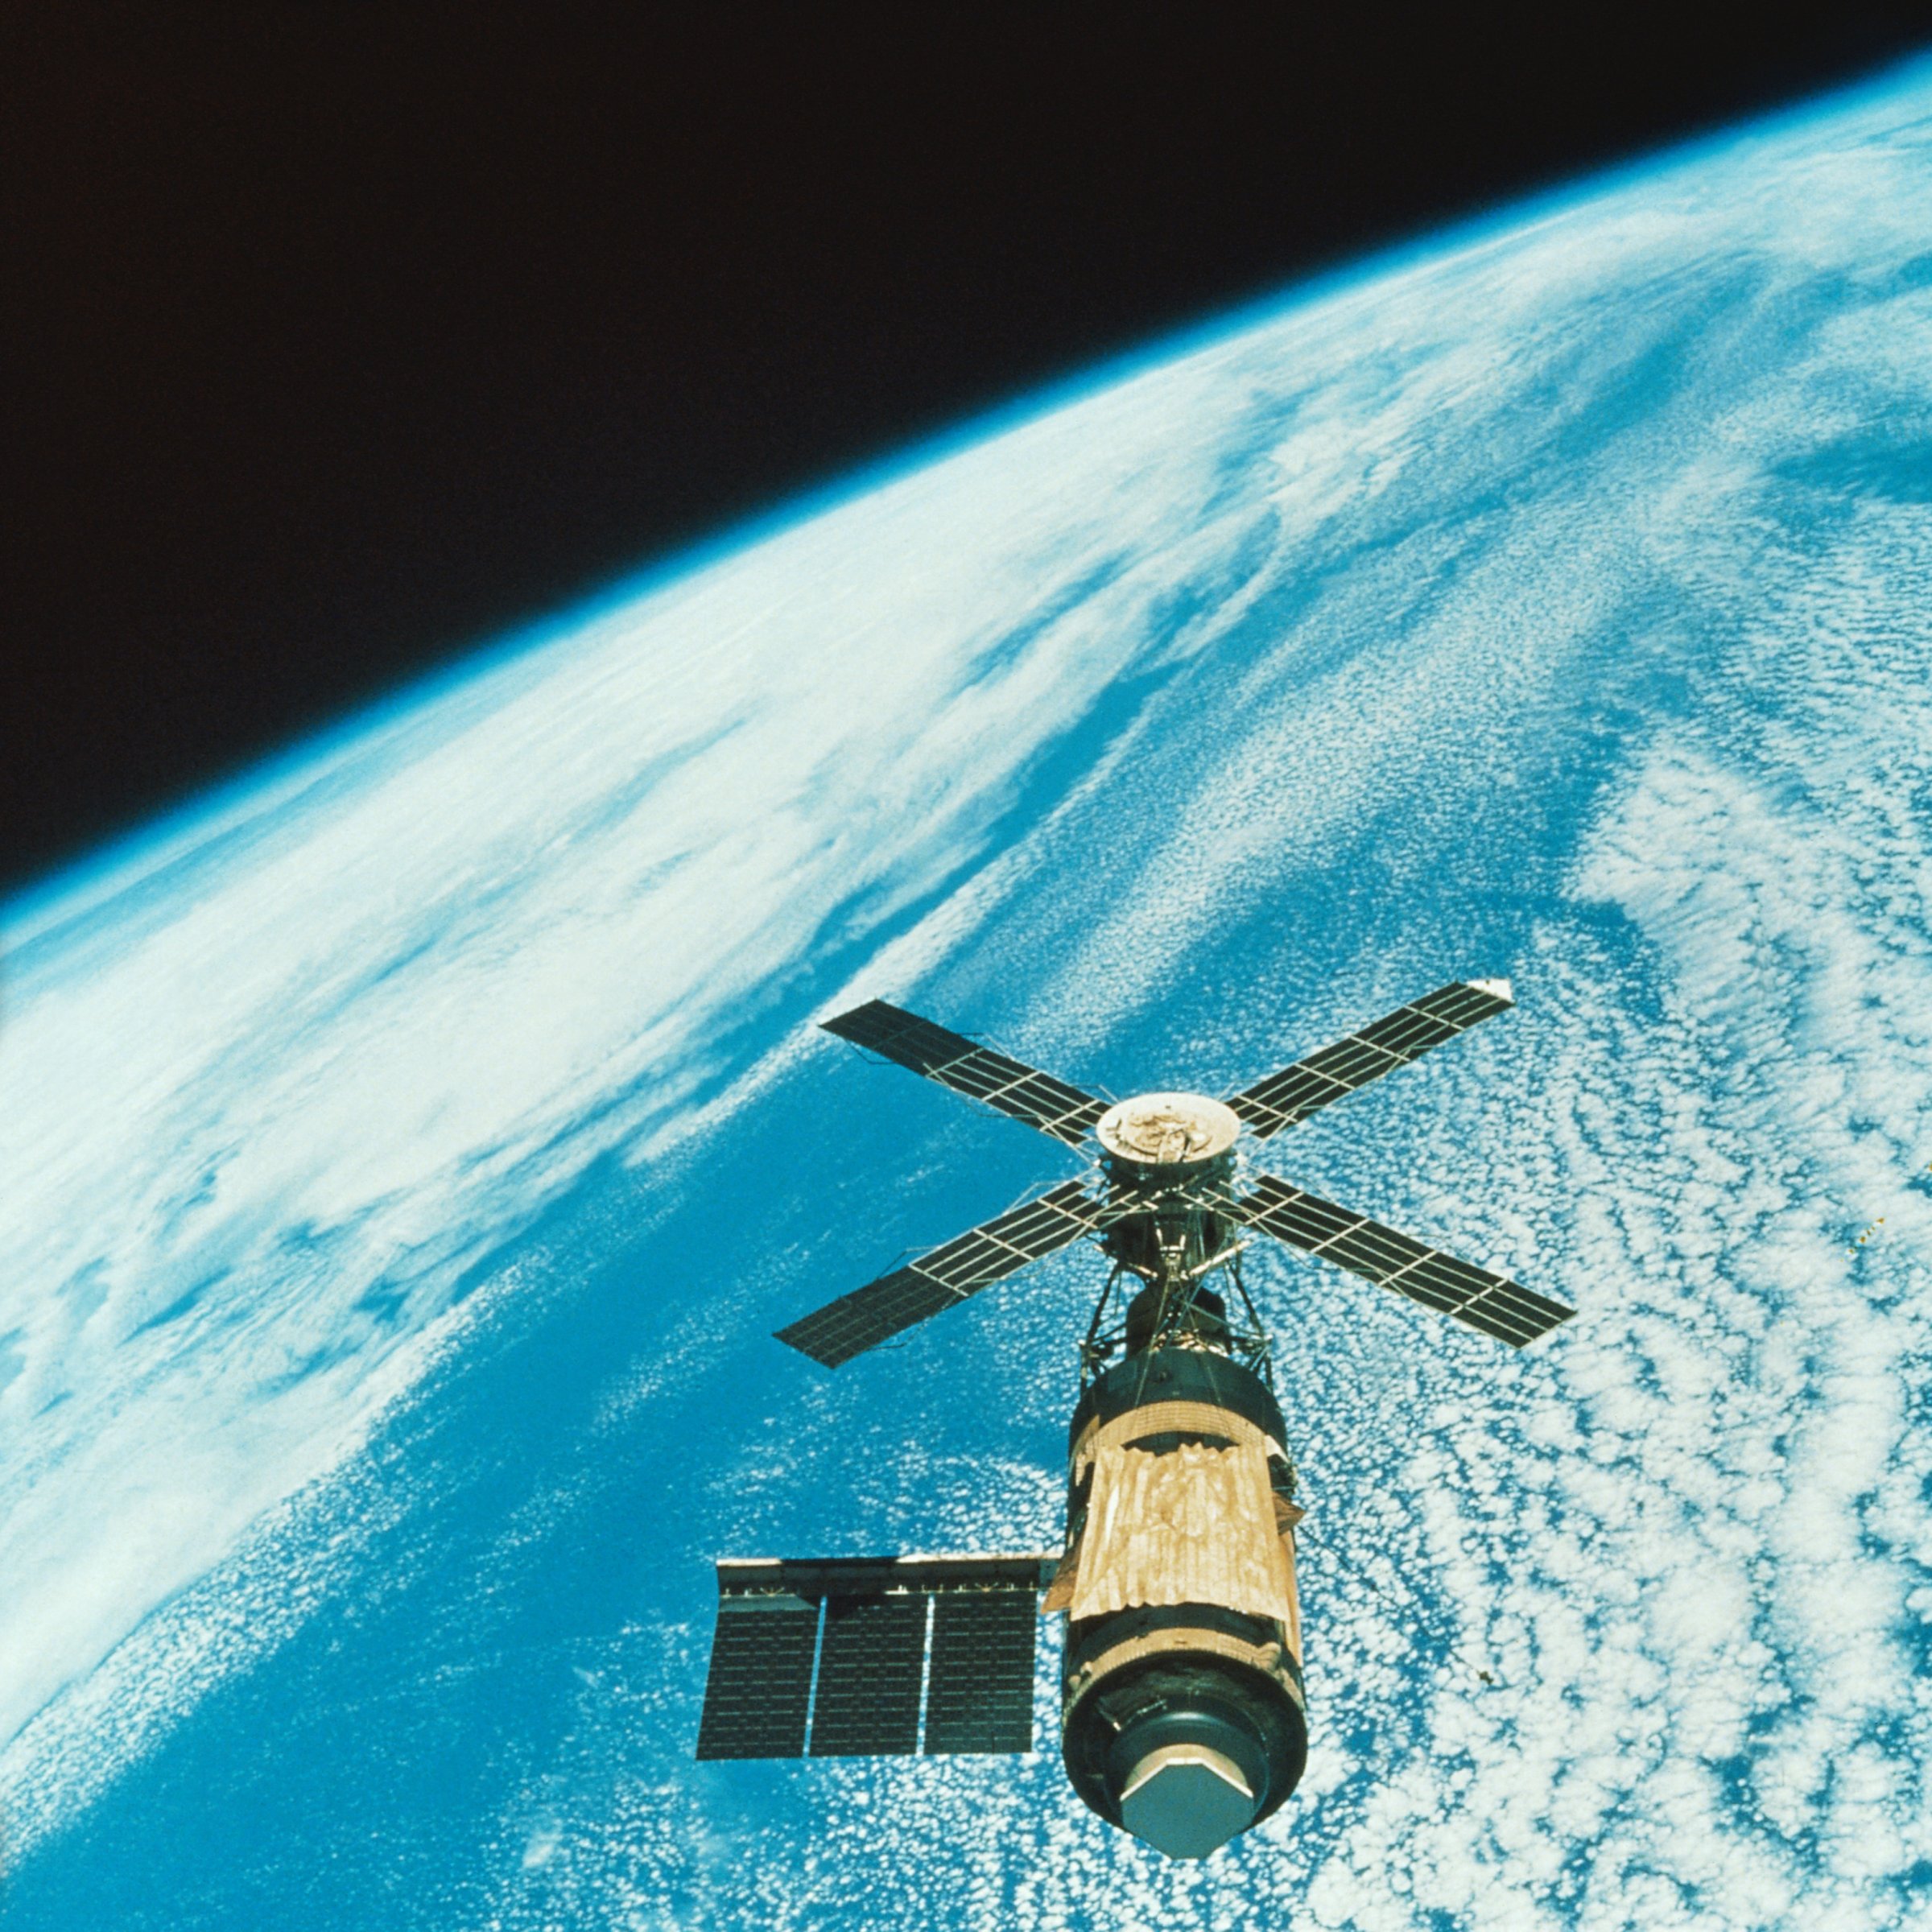 Skylab, with its gold colored sun shield covering its crew module